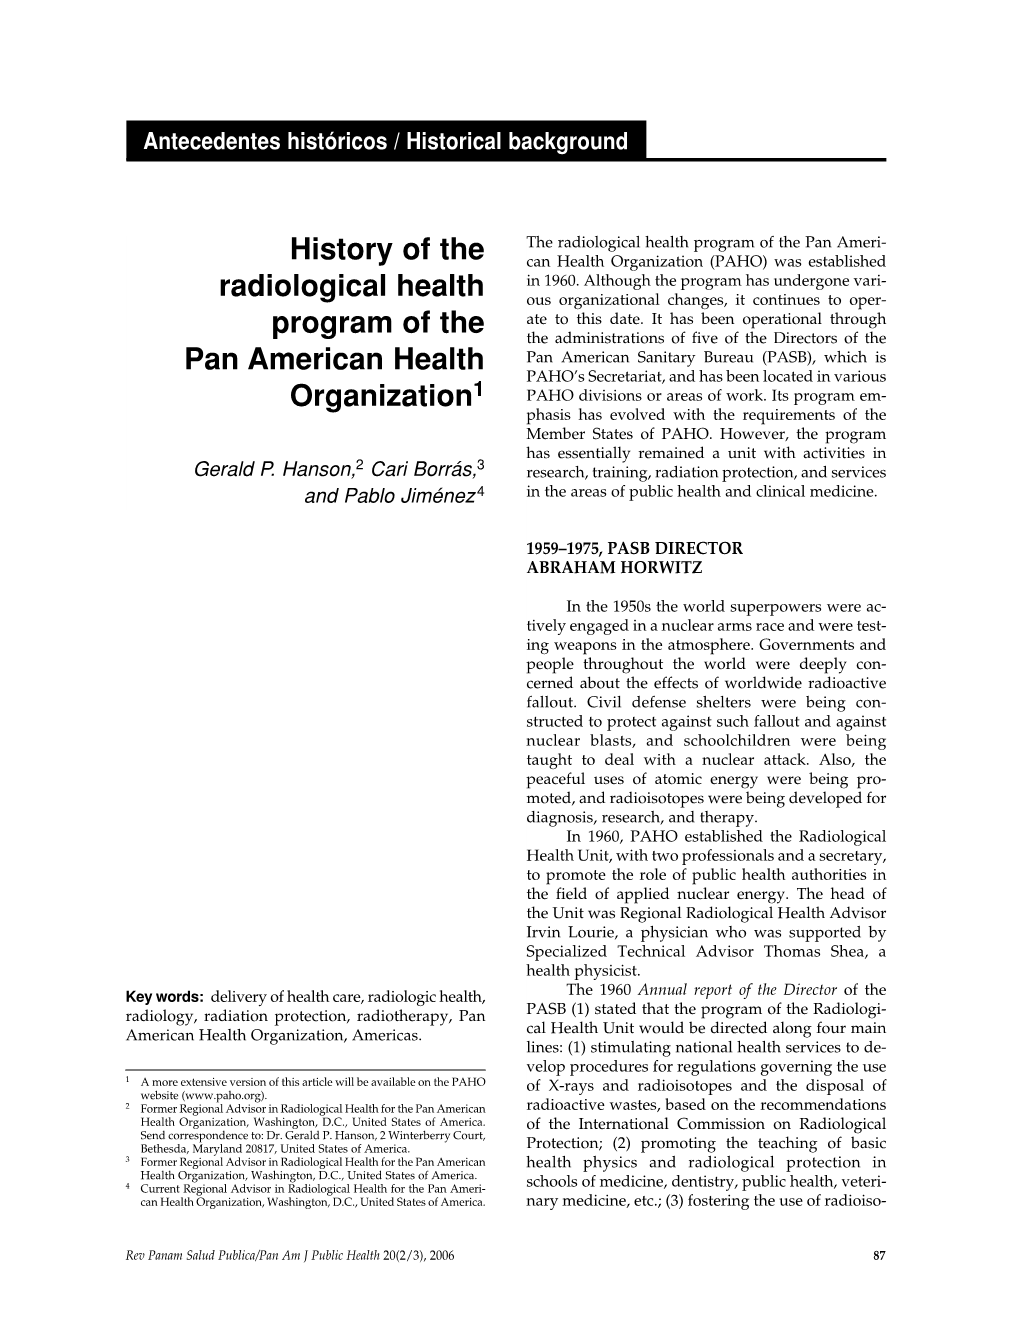 History of the Radiological Health Program of the Pan American Health Organization1